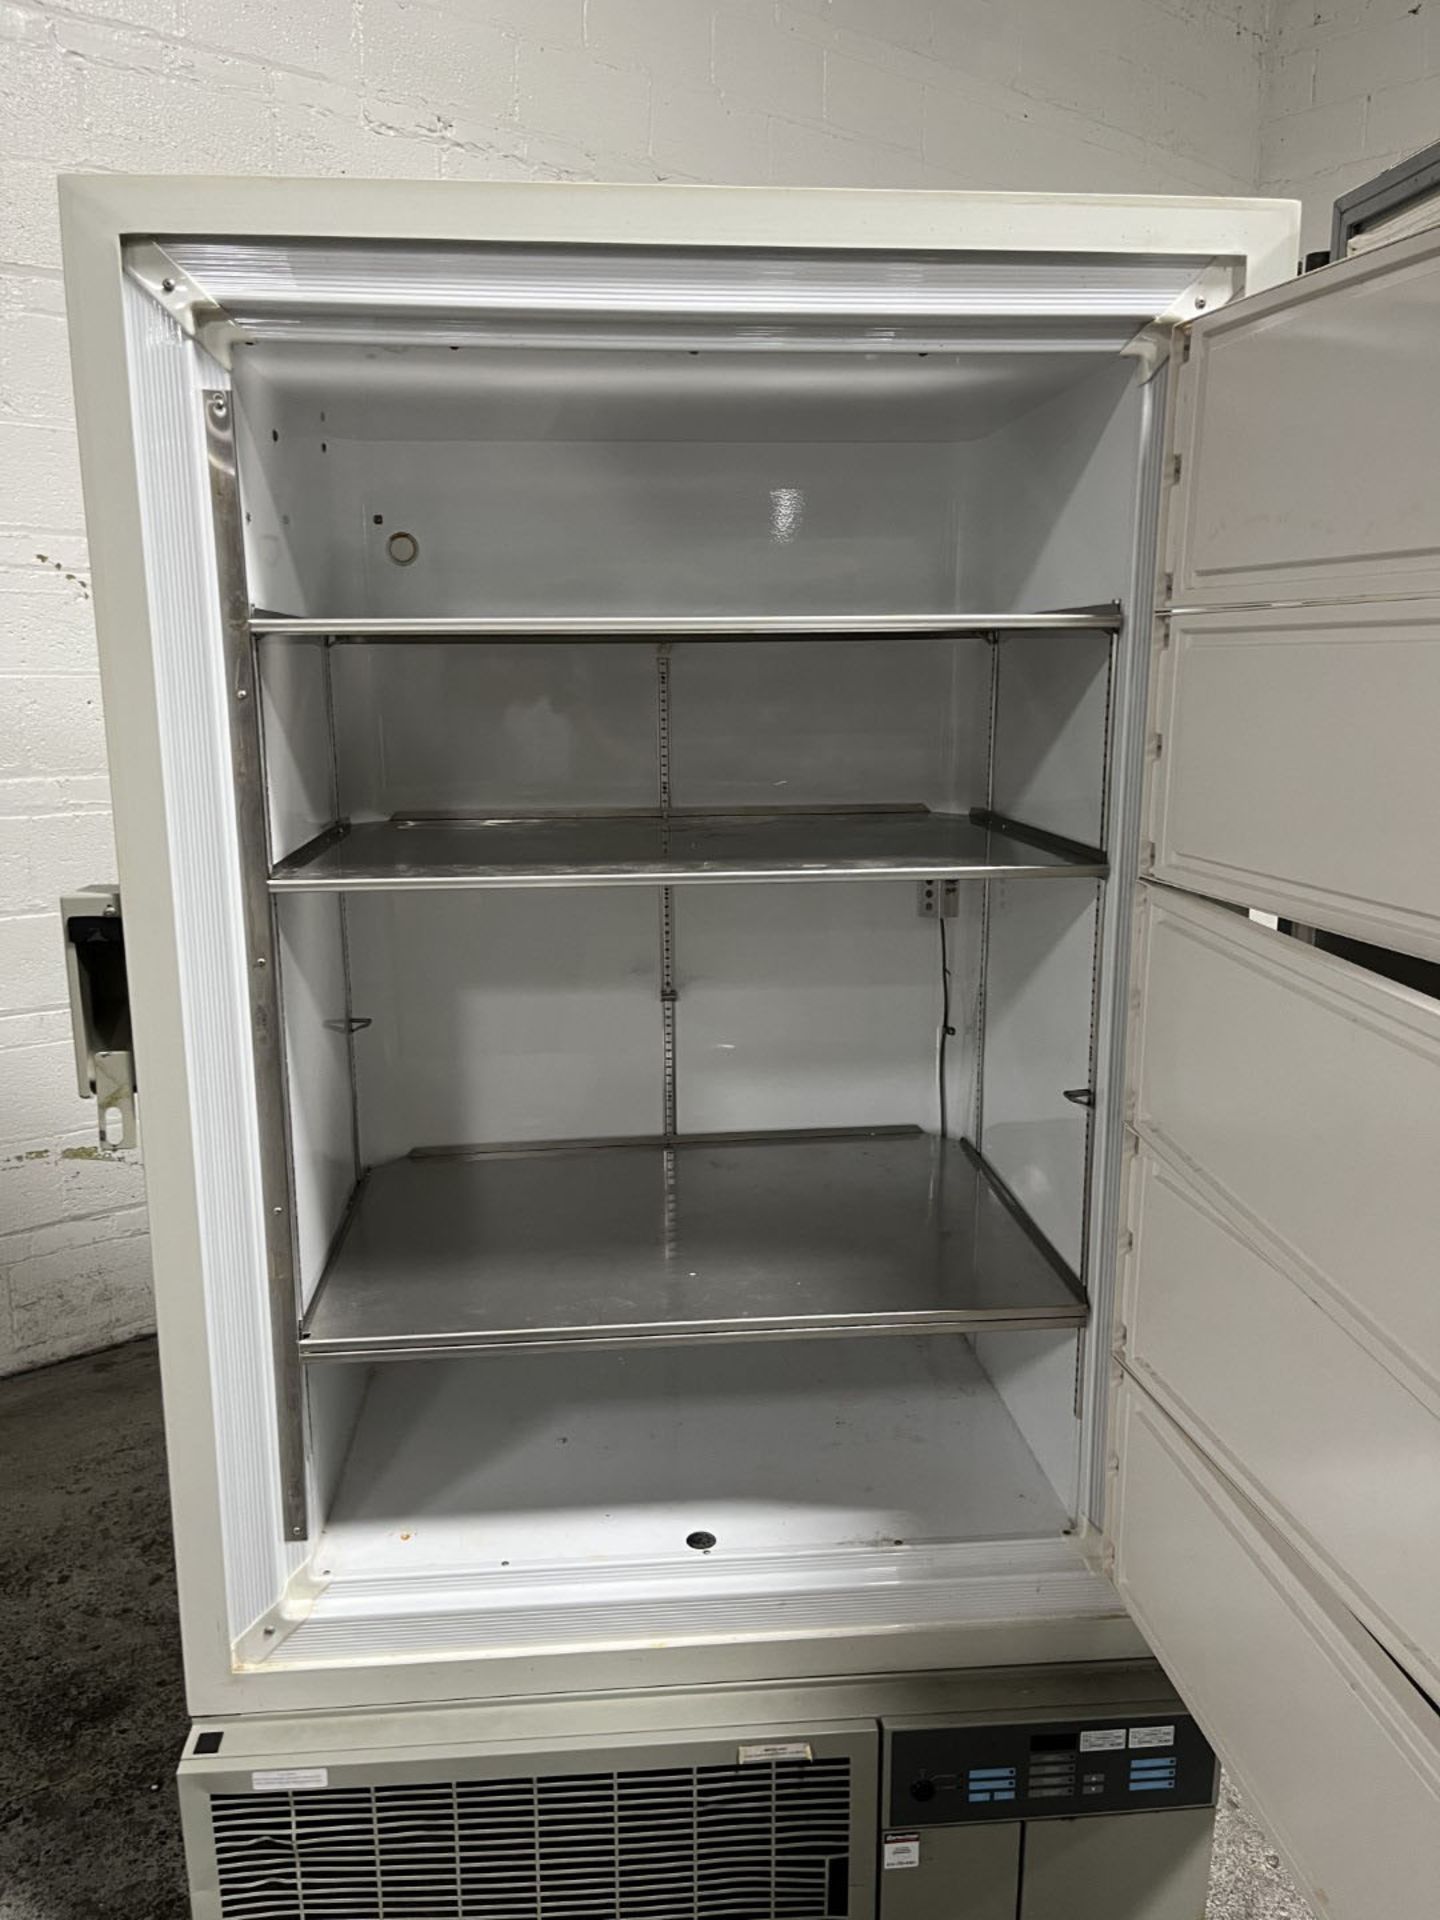 Revco Ultra Low Temperature Freezer, Model ULT2586-5-A35 - Image 7 of 8